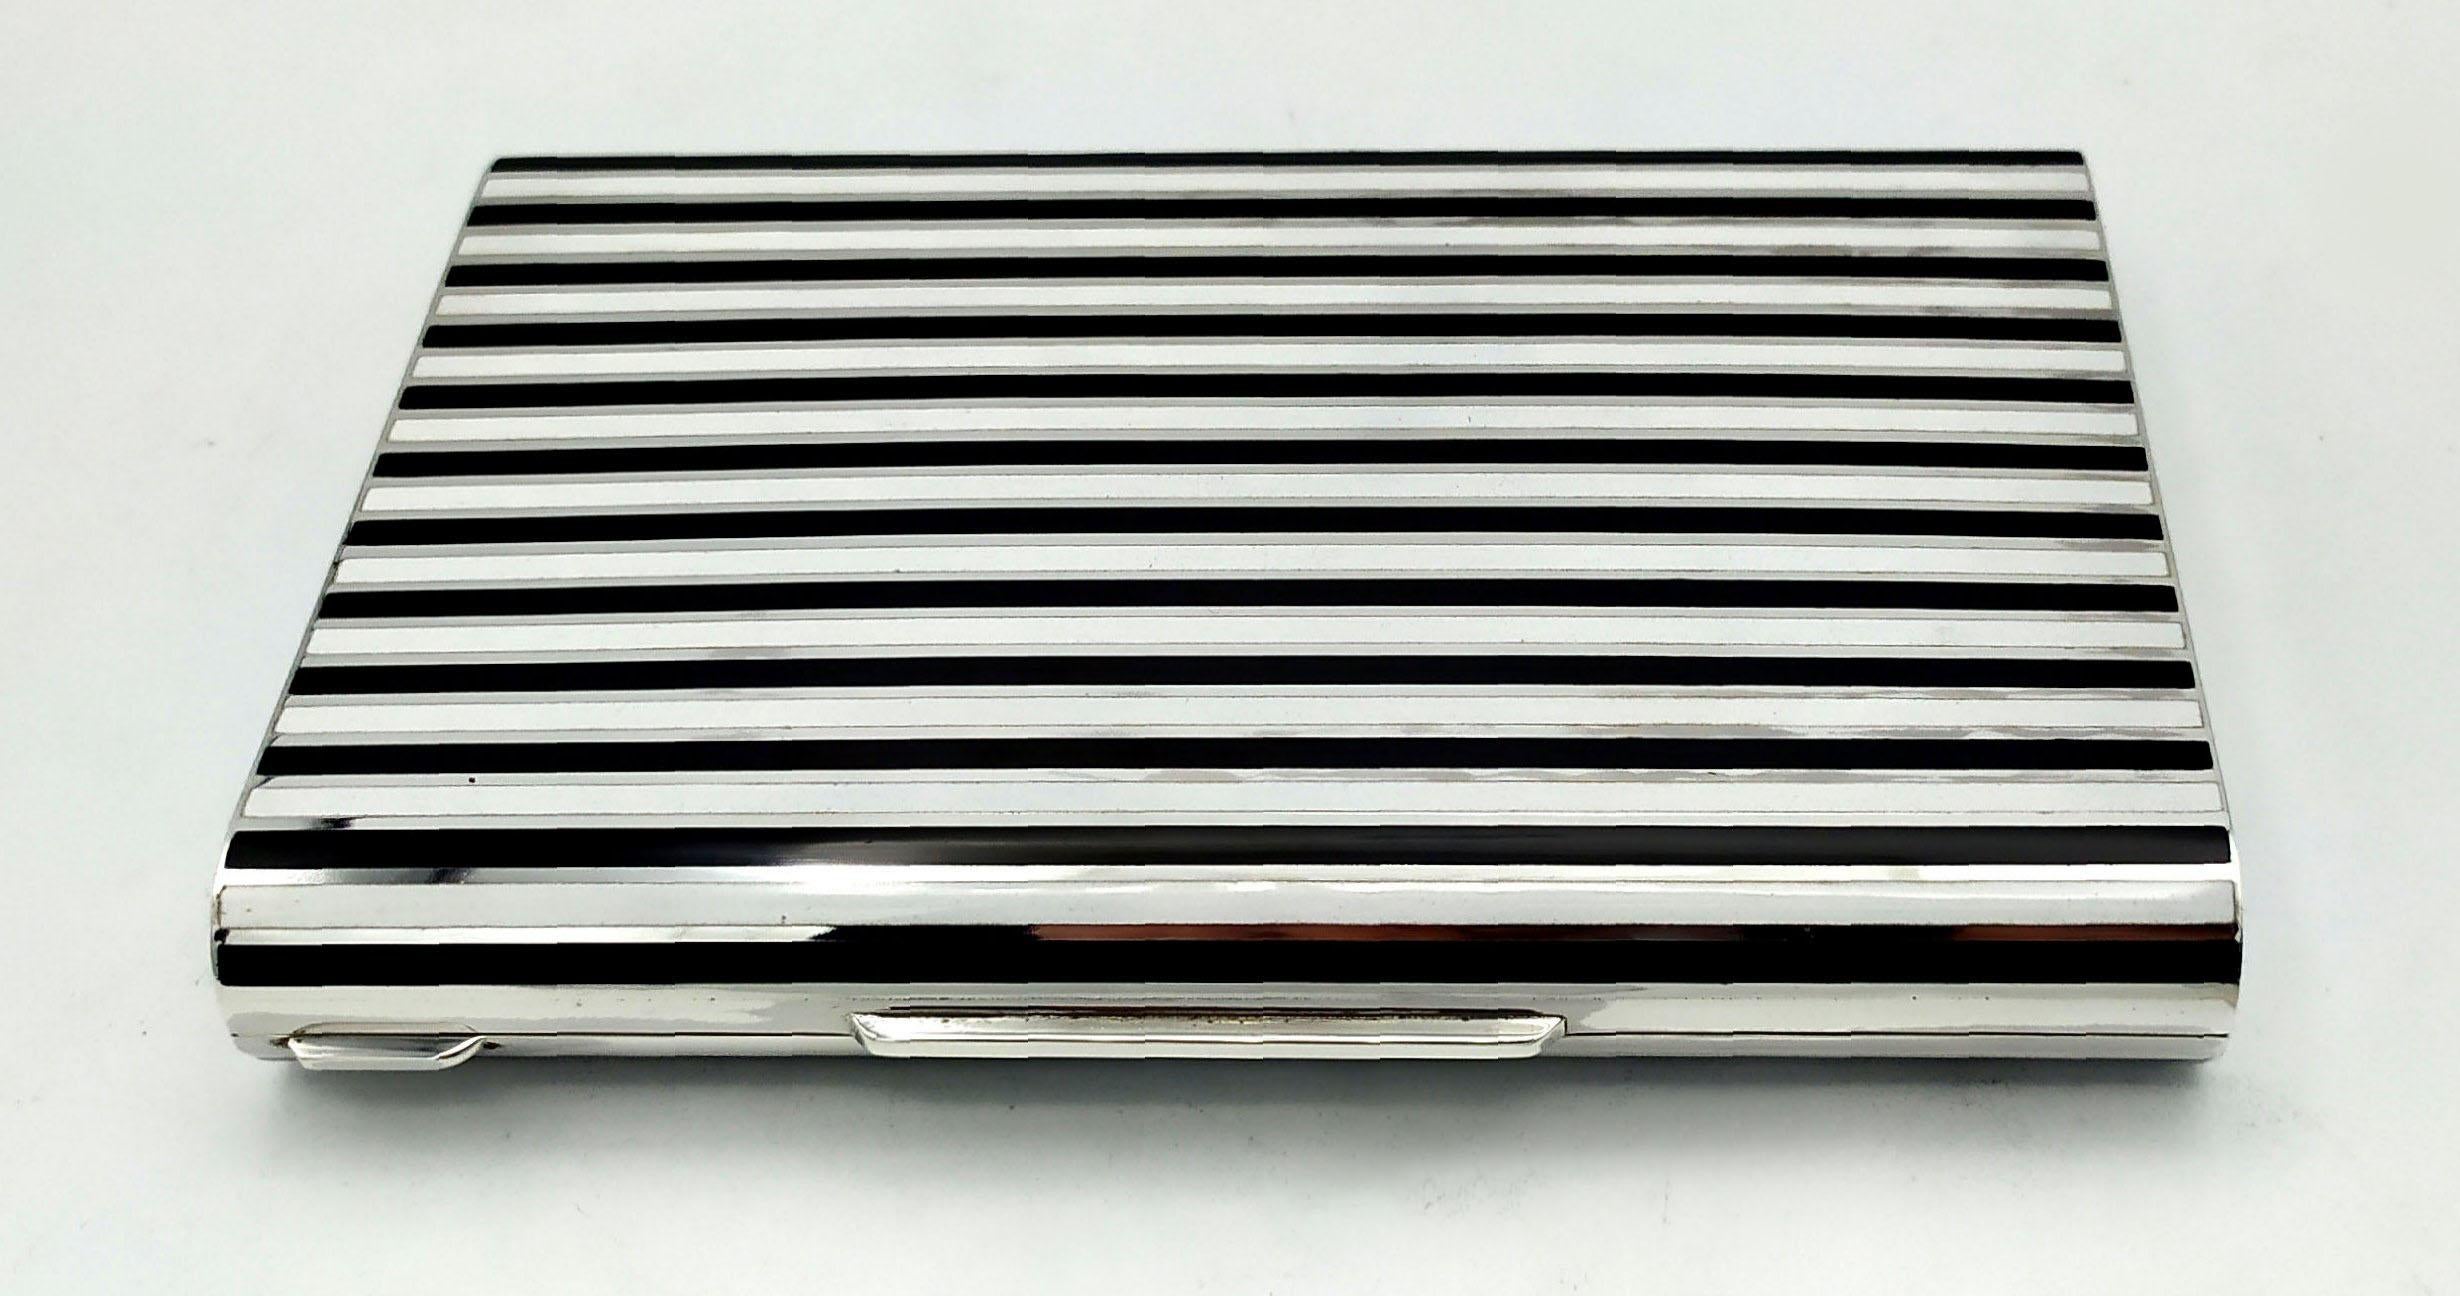 Large rectangular table box with long rounded sides in 925/1000 sterling silver with fire-enamelled stripes in Art Deco style. With “lost” hinge, i.e. semi-invisible. Dimensions cm. 10.5 x 15 x 2.3. Weight gr. 548. Inspired by drawings by Louis